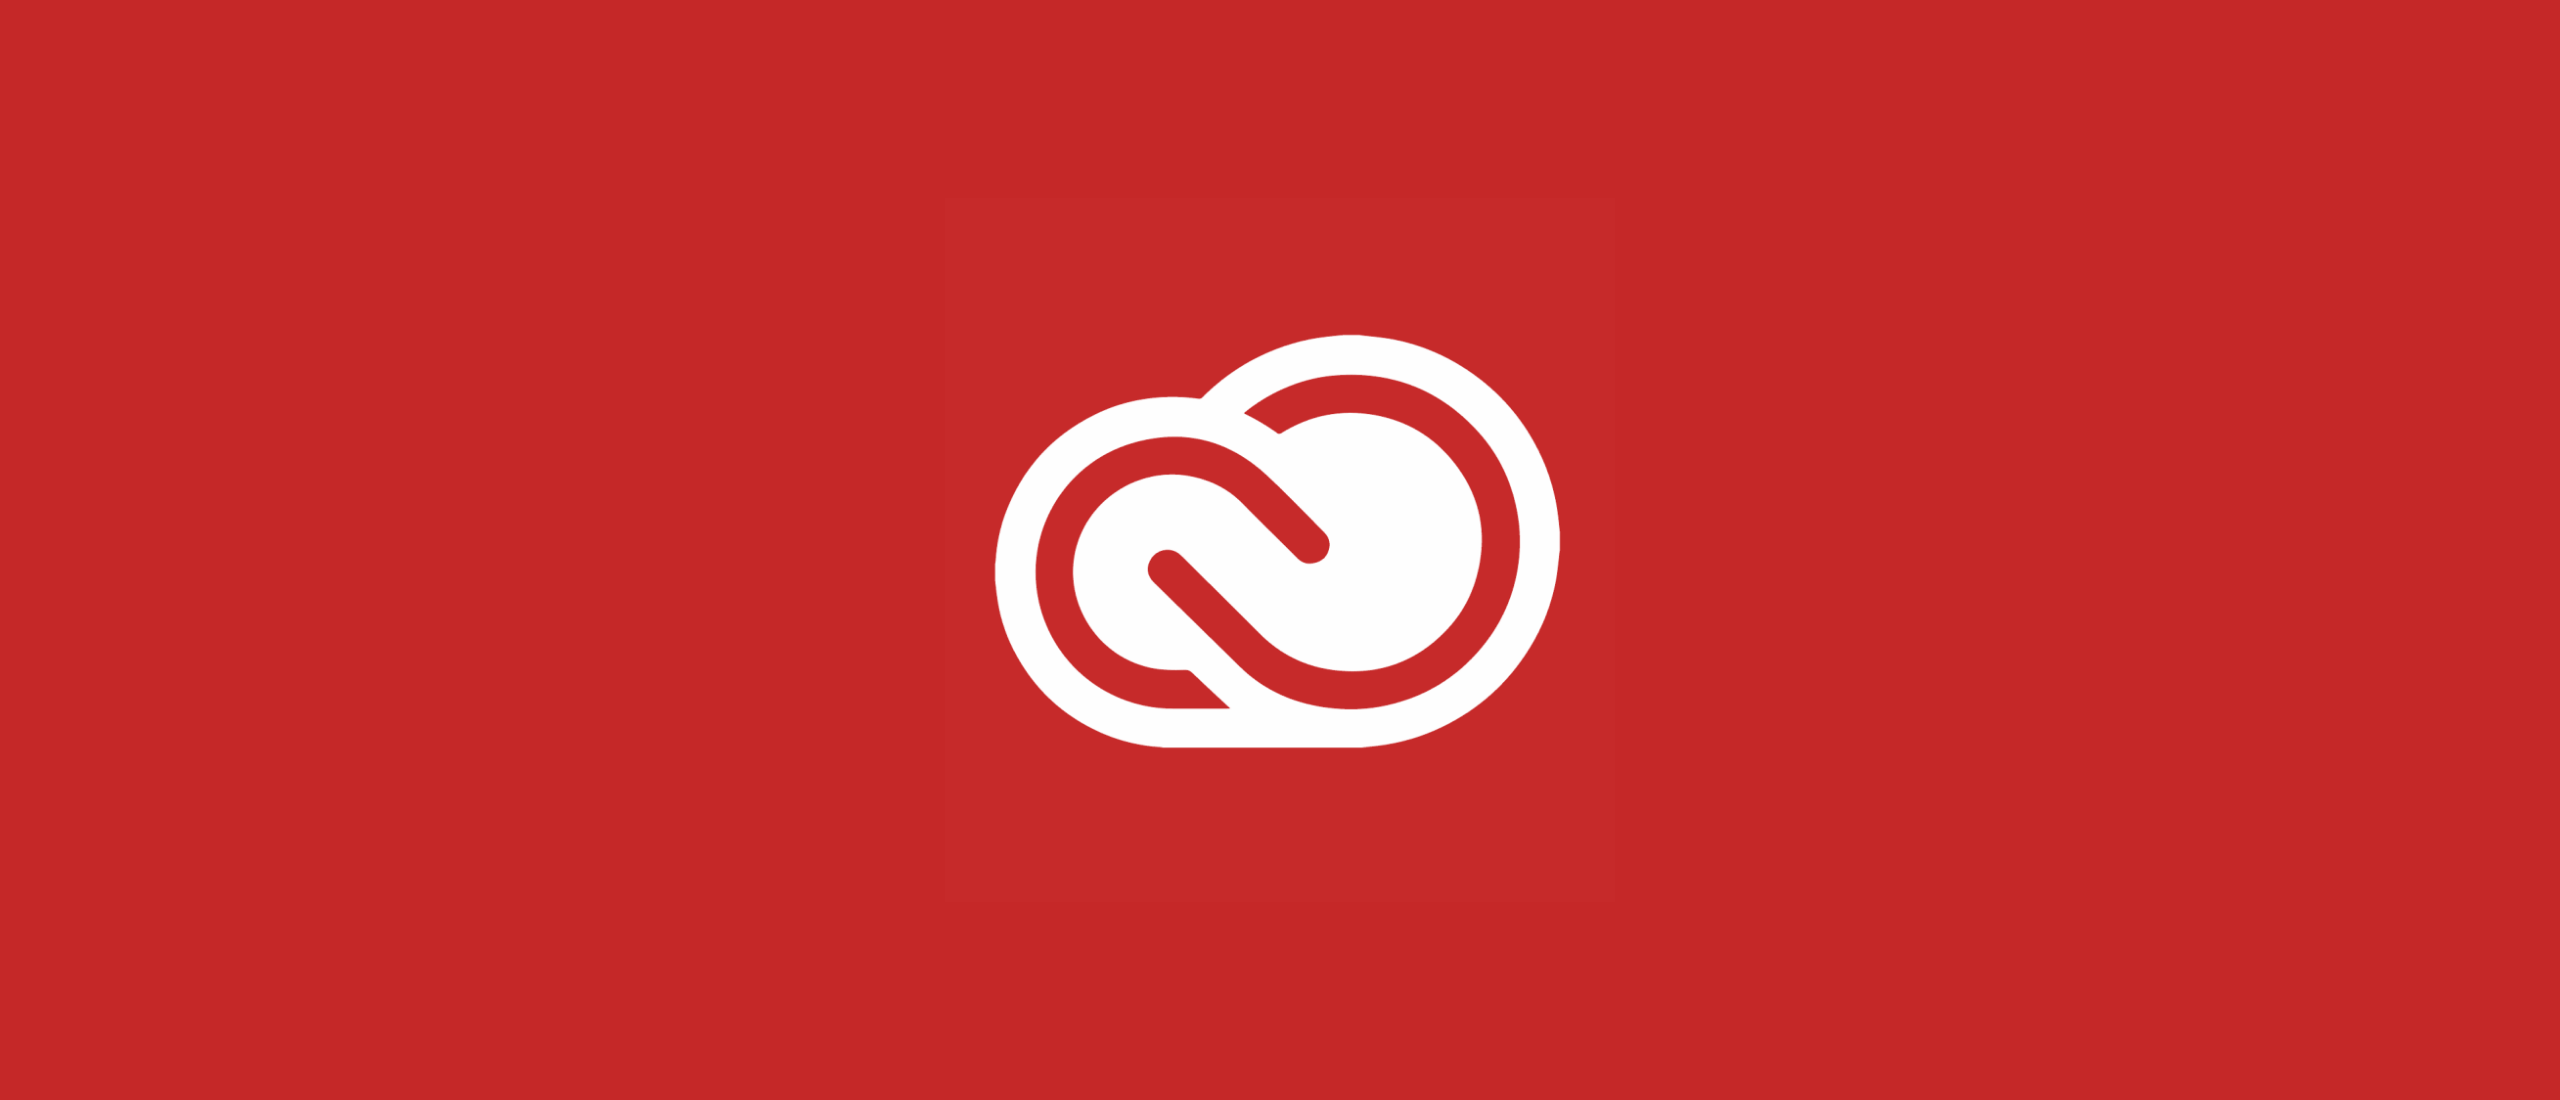 What is adobe creative cloud? | what can we do with creative cloud?